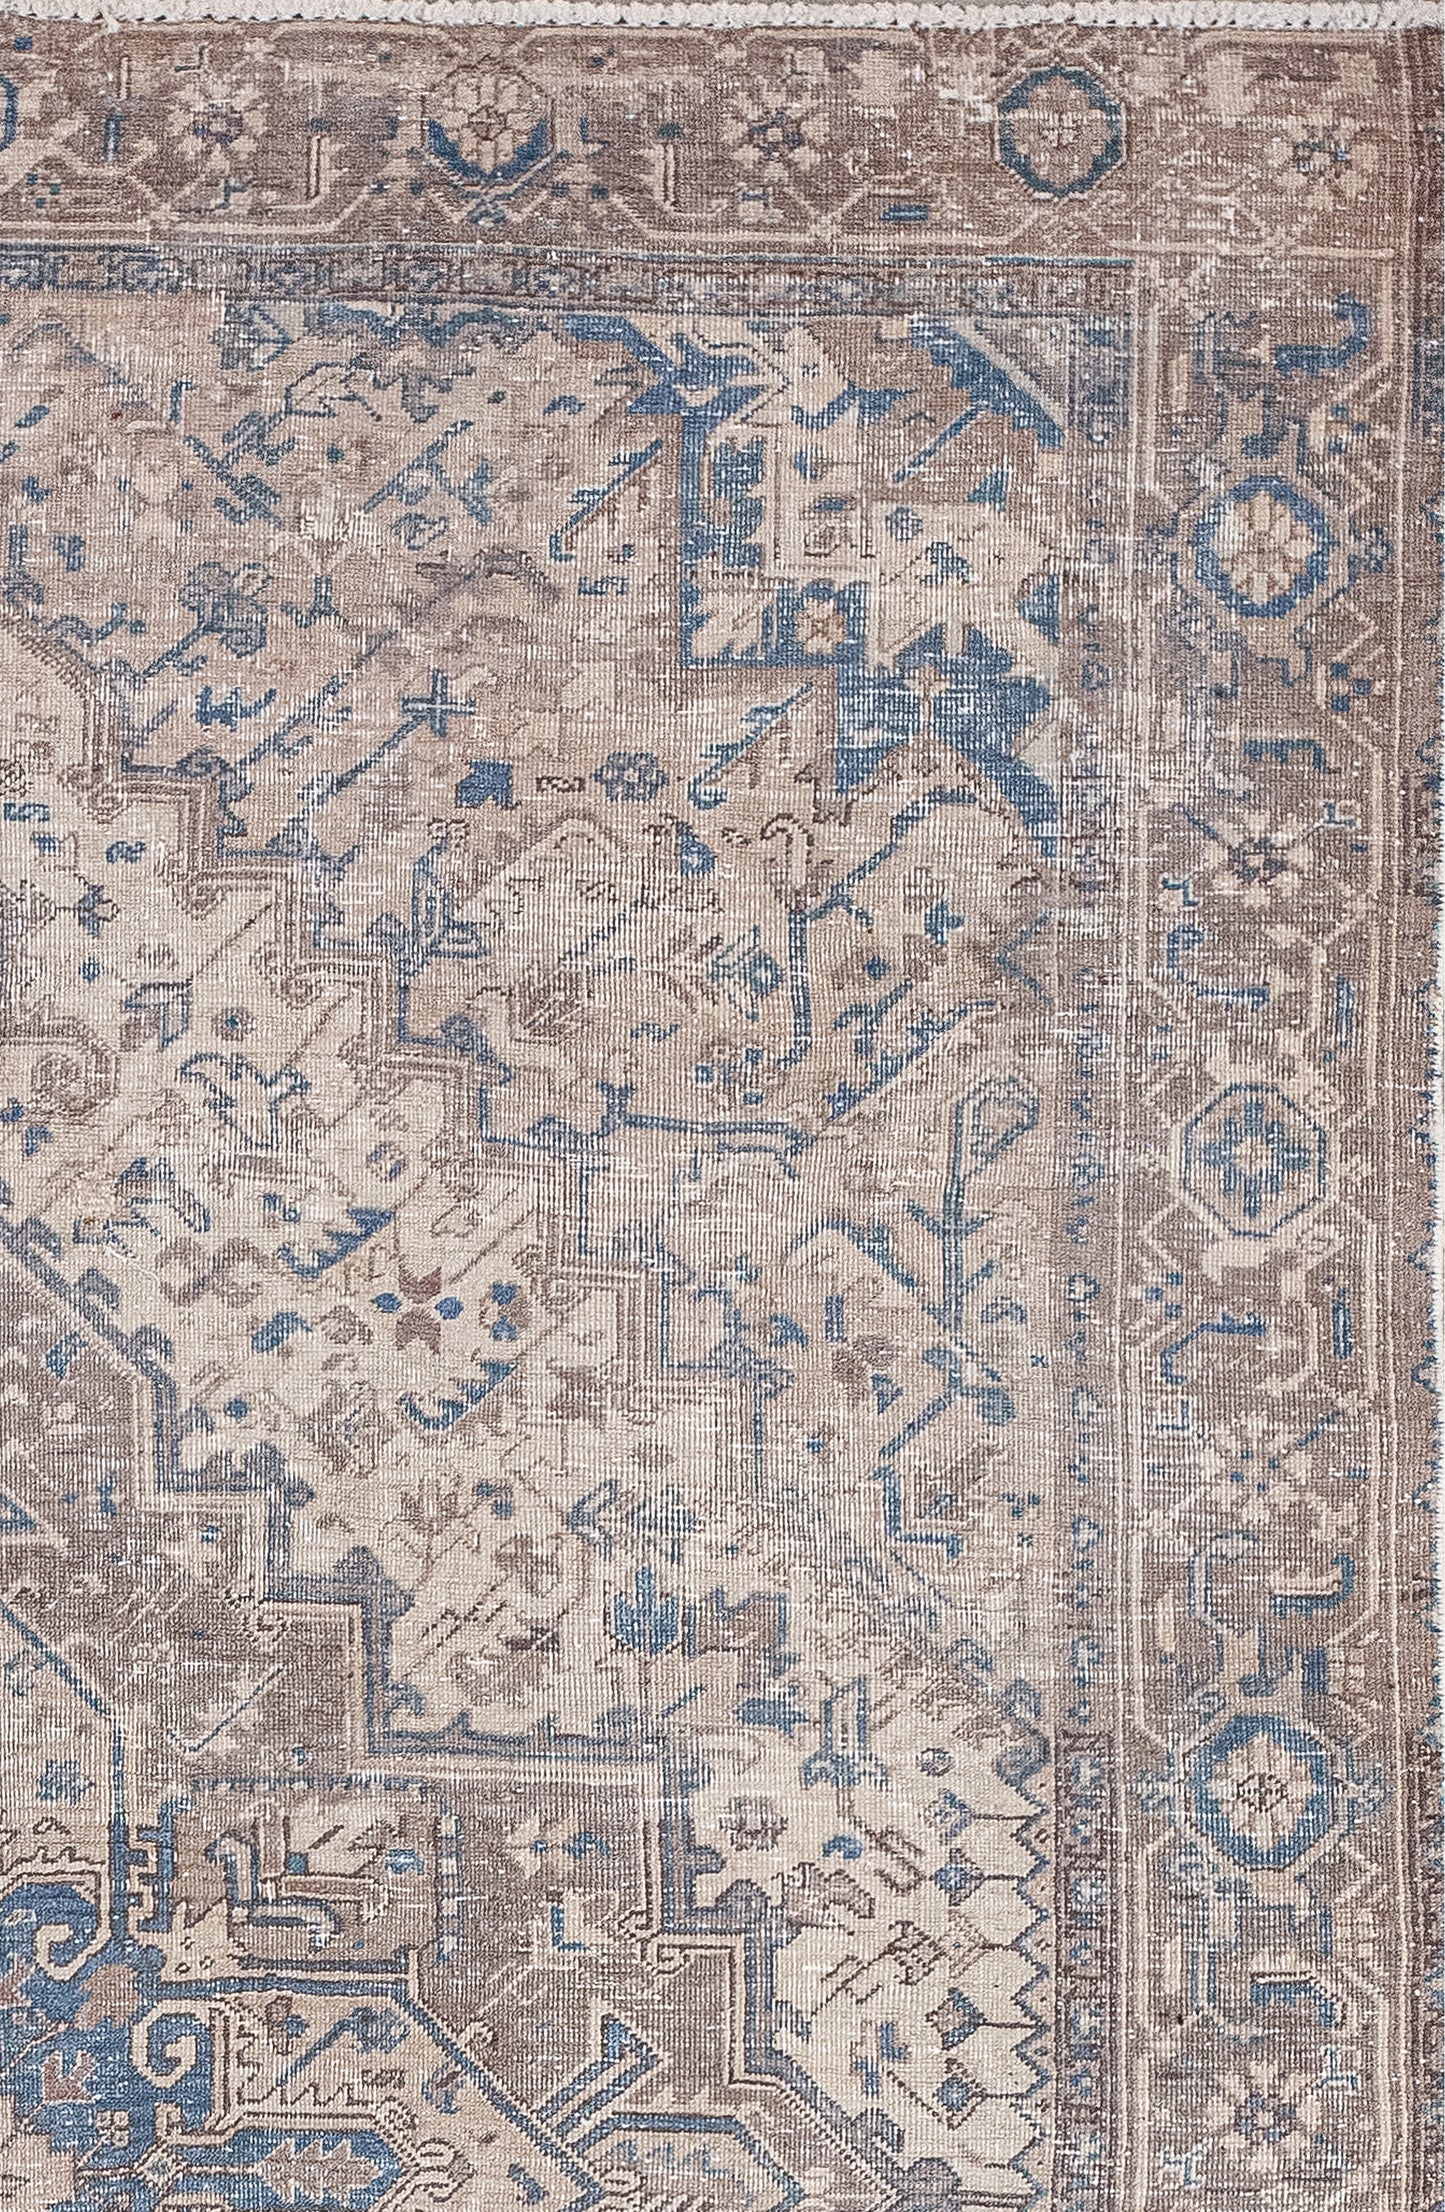 The entire perimeter comes in a brown background with a beige pattern and blue details. Also, the pattern shows hexagons, petals and flower heads, and everything is connected with lines and ornaments around it.